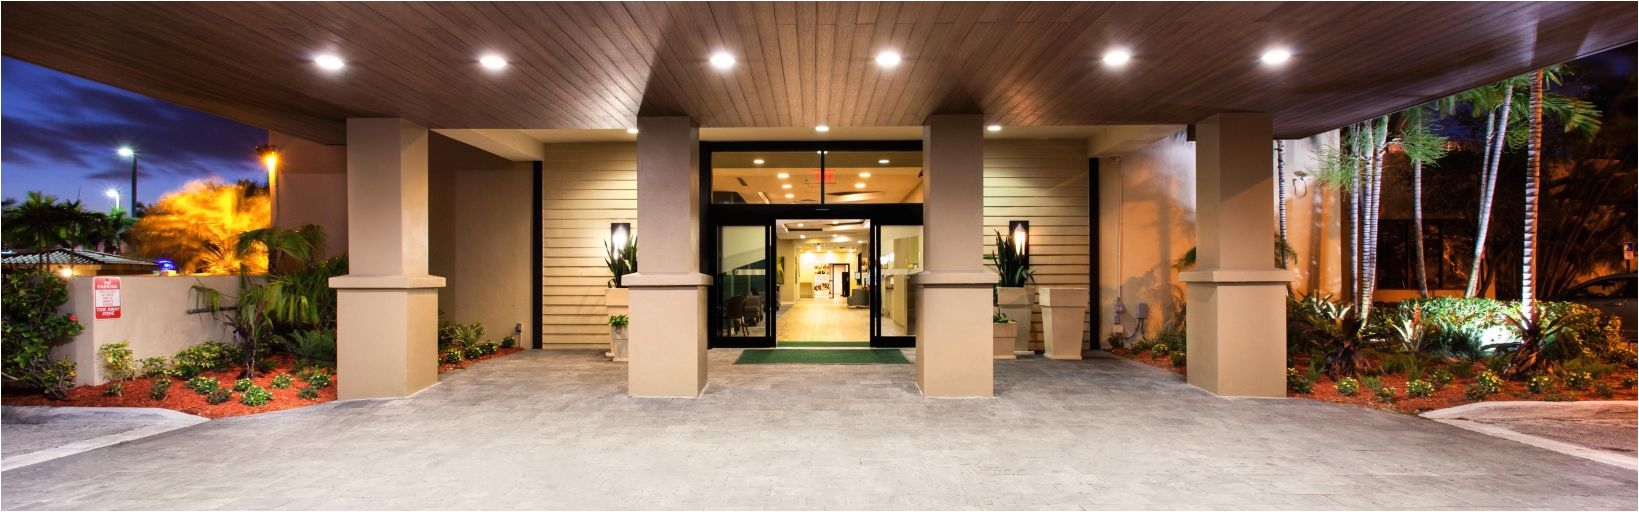 our spacious portico will allow for a fast easy check in